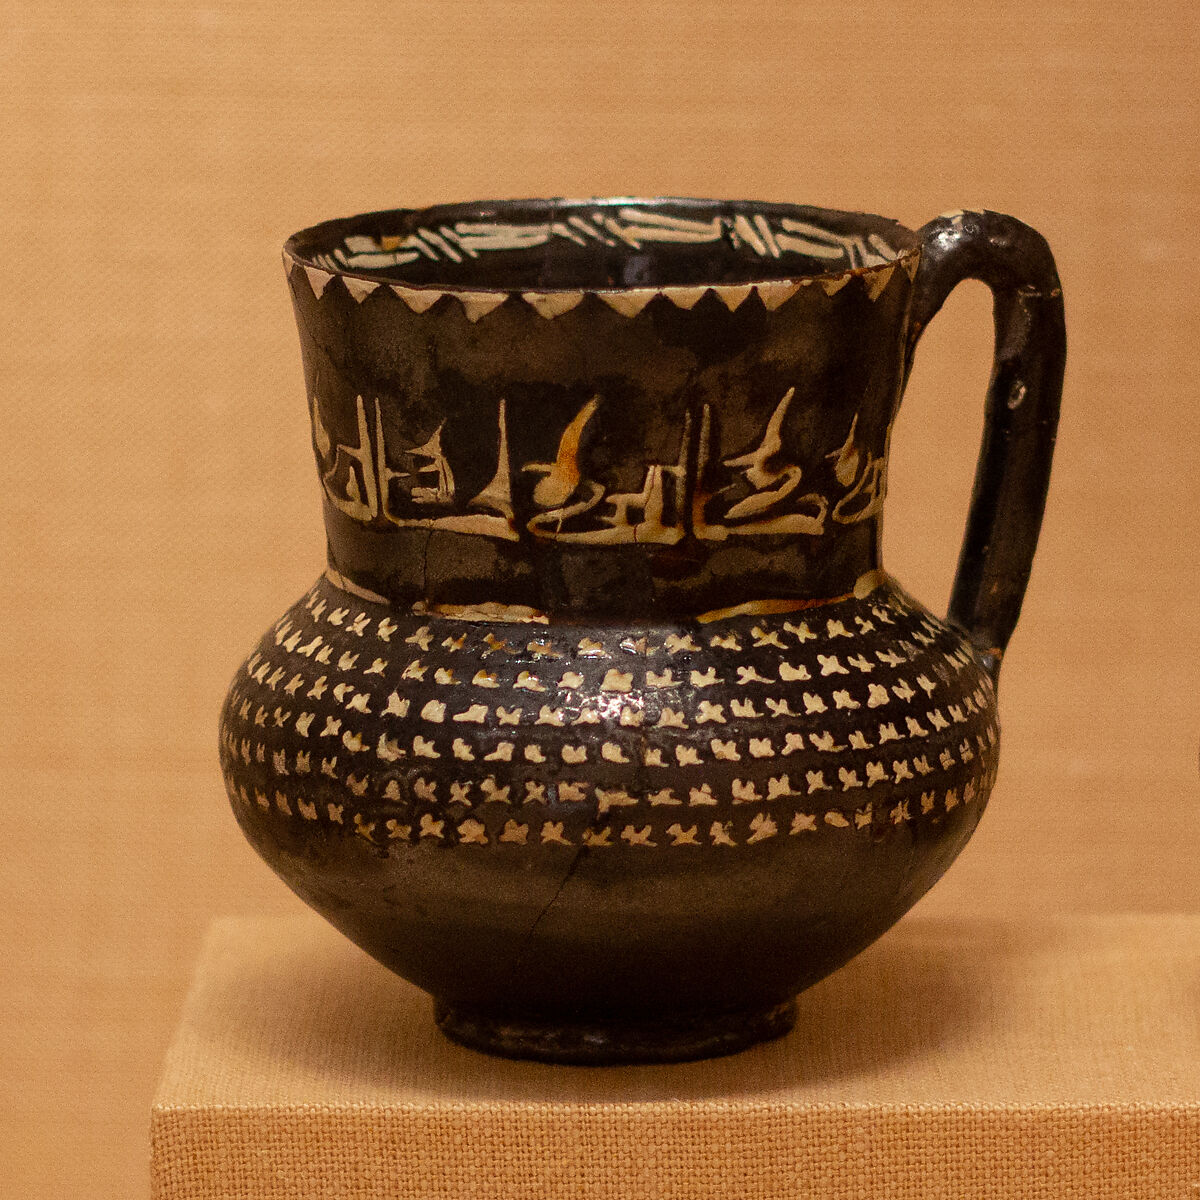 Ewer with Repeated Arabic Phrase, "Blessing", Earthenware; black slip with white slip decoration under transparent glaze 